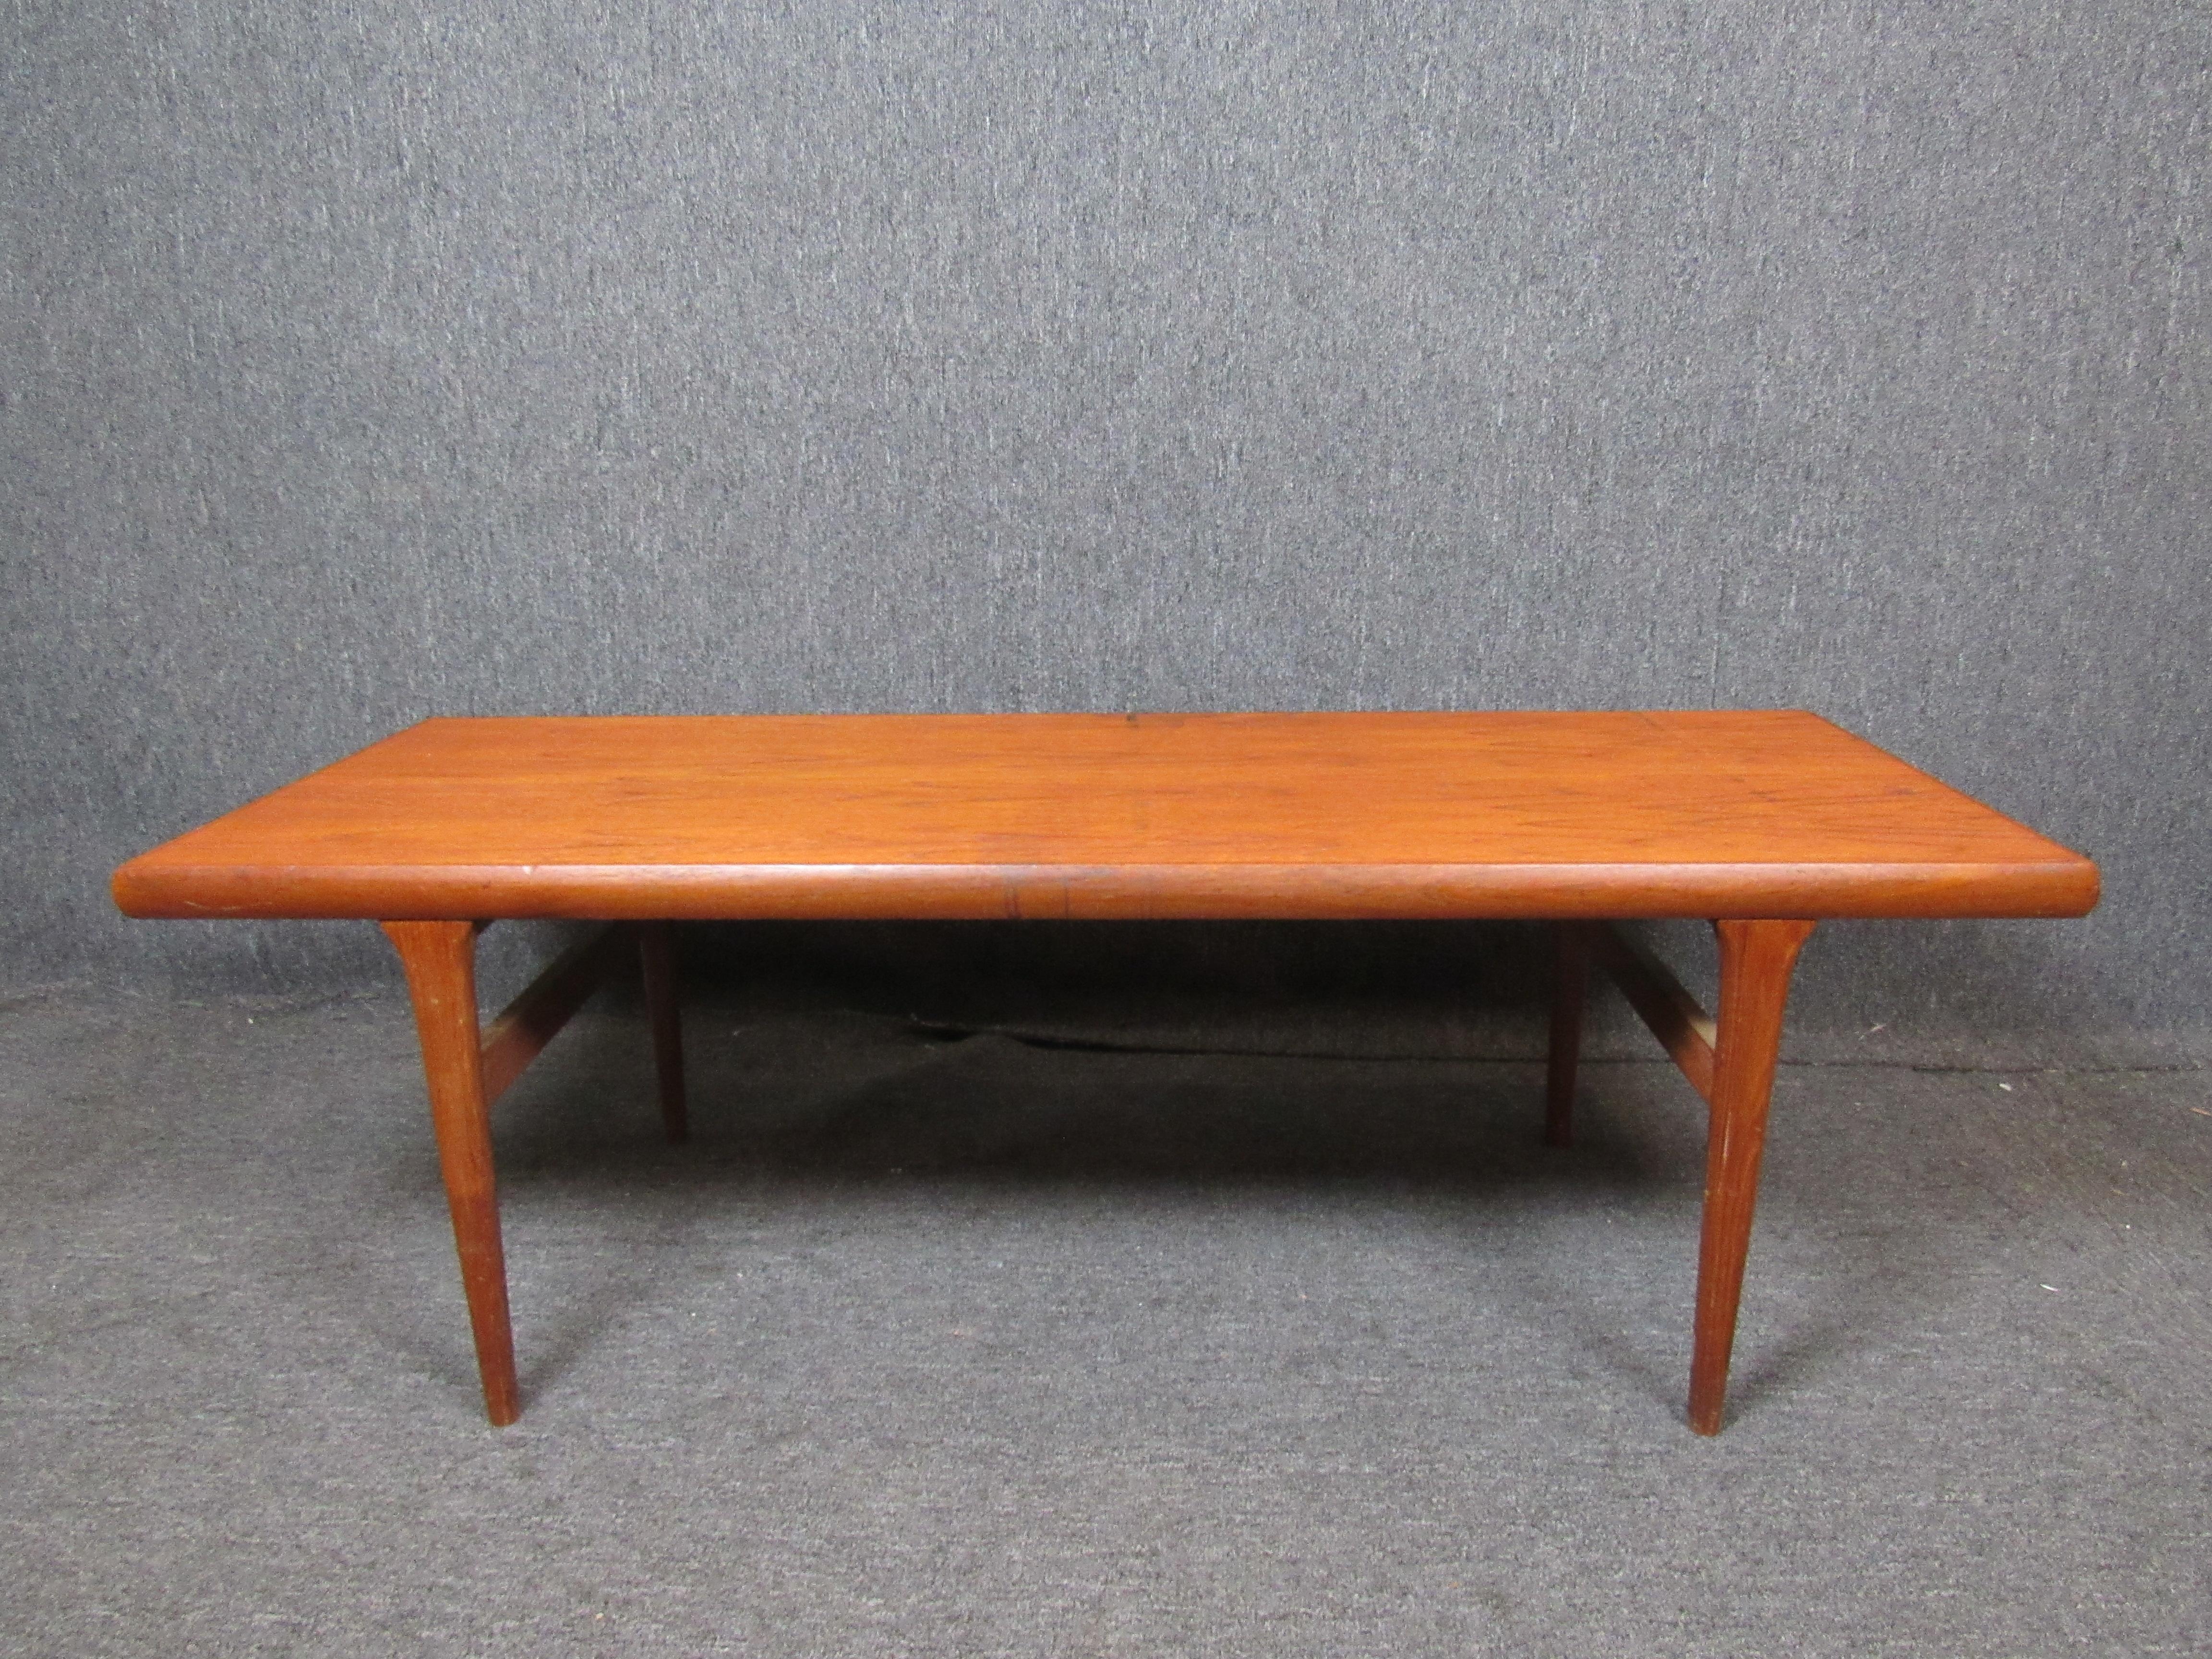 A classic mid-century Danish coffee table with a beautiful natural teak grain. Slender, carved legs give a sleek profile, sure to work well with a variety of styles. An ample tabletop makes this piece perfect for any room in the home, office, or